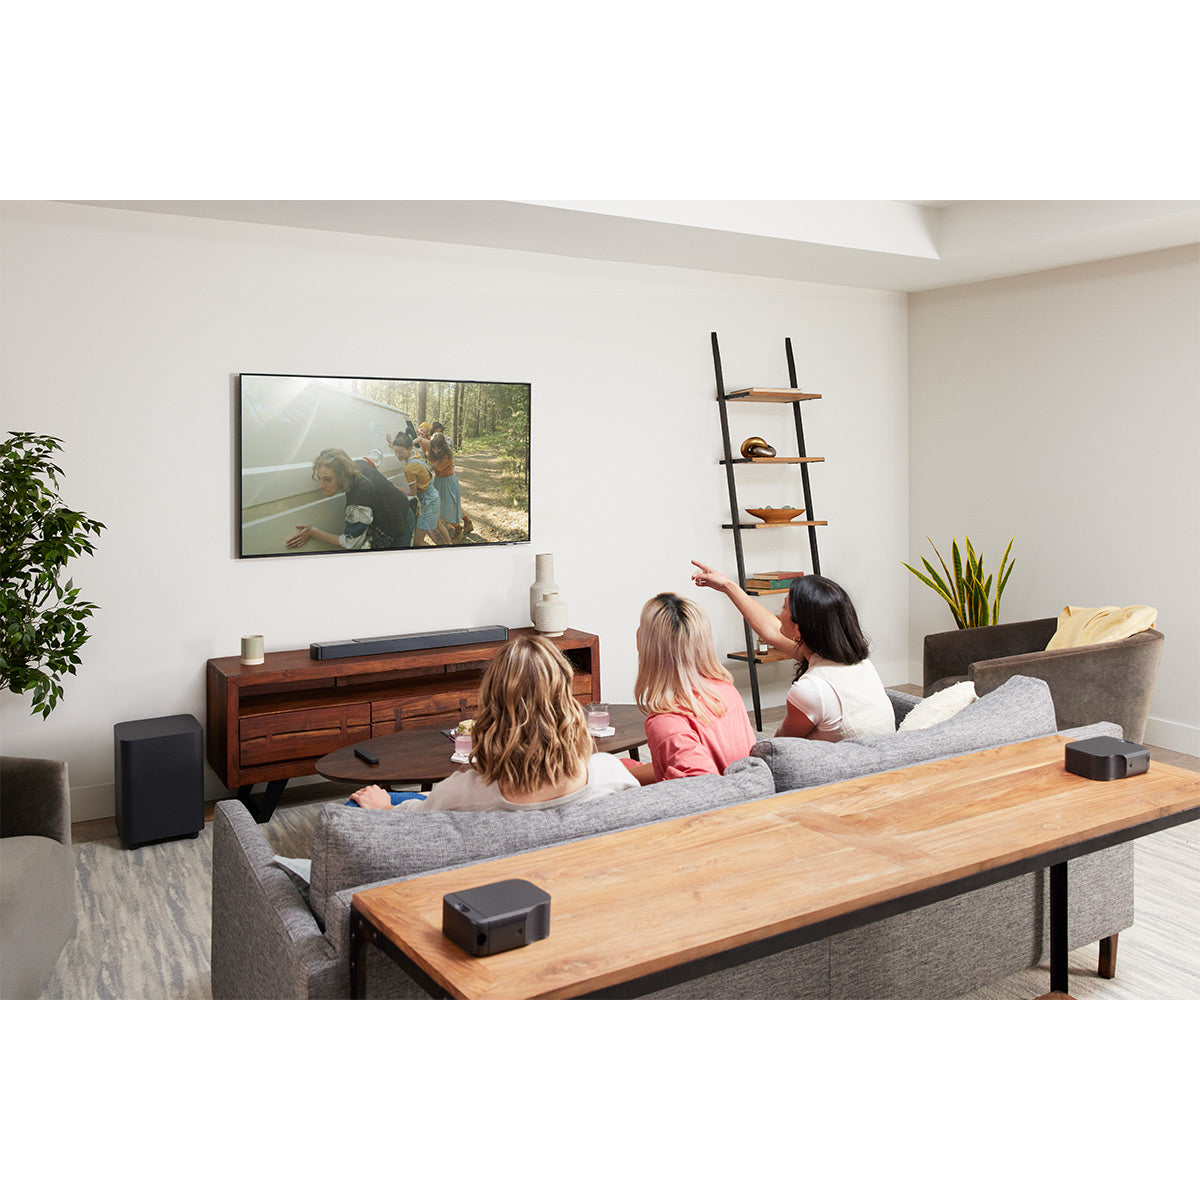 JBL Bar 700 Surround Sound System with 5.1 Channel Soundbar, 10" Wireless Subwoofer and Detachable Rear Speakers